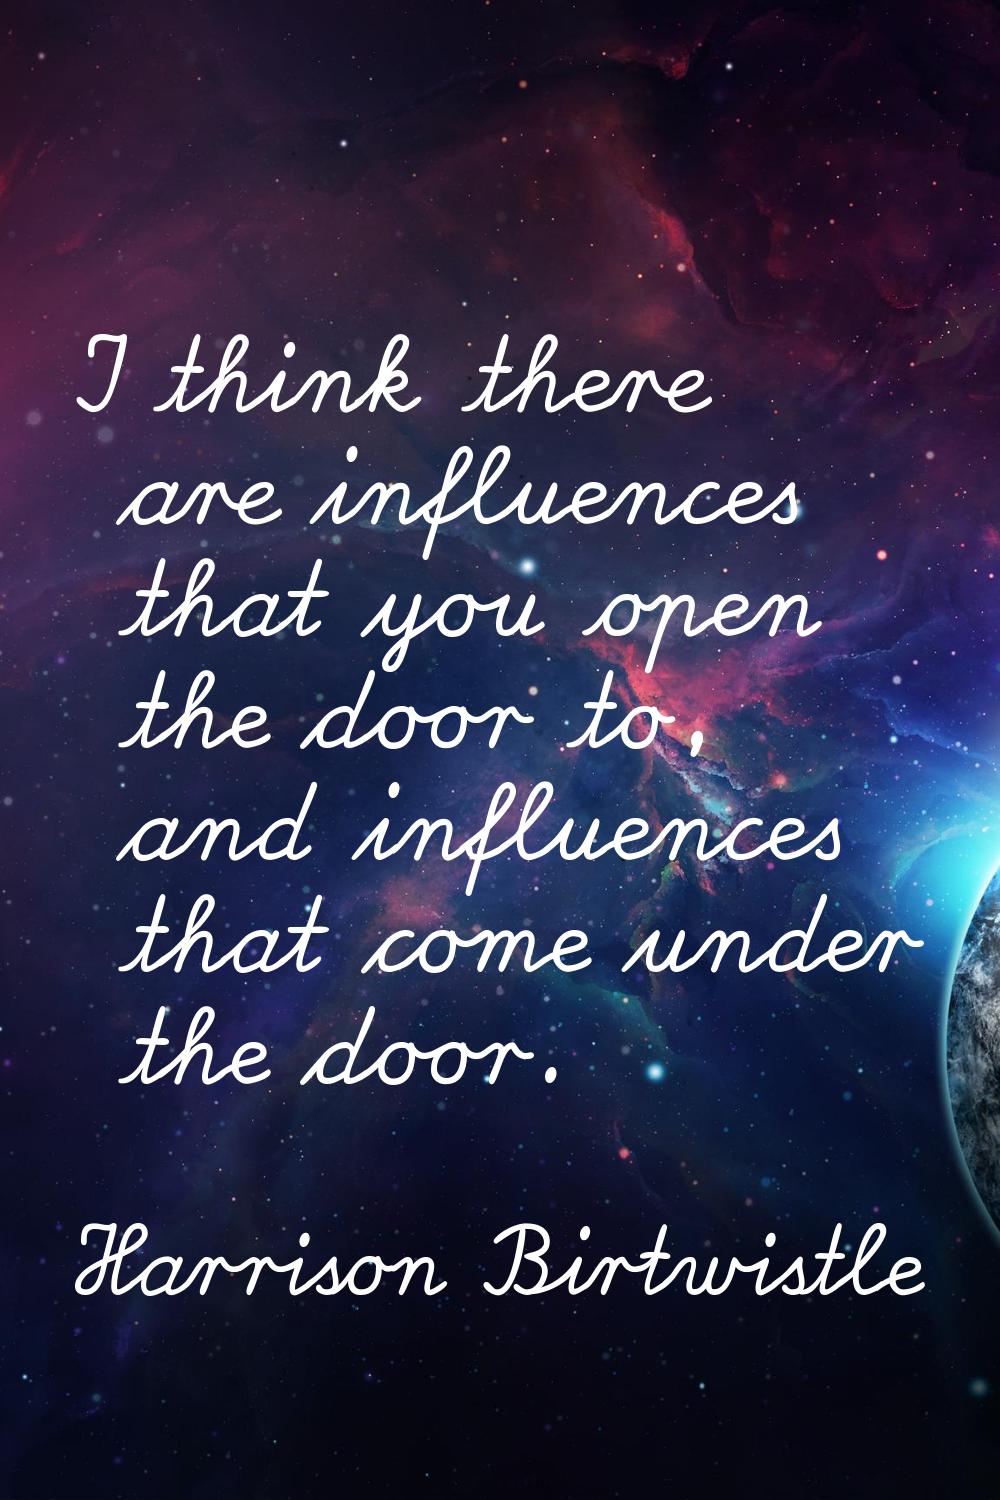 I think there are influences that you open the door to, and influences that come under the door.